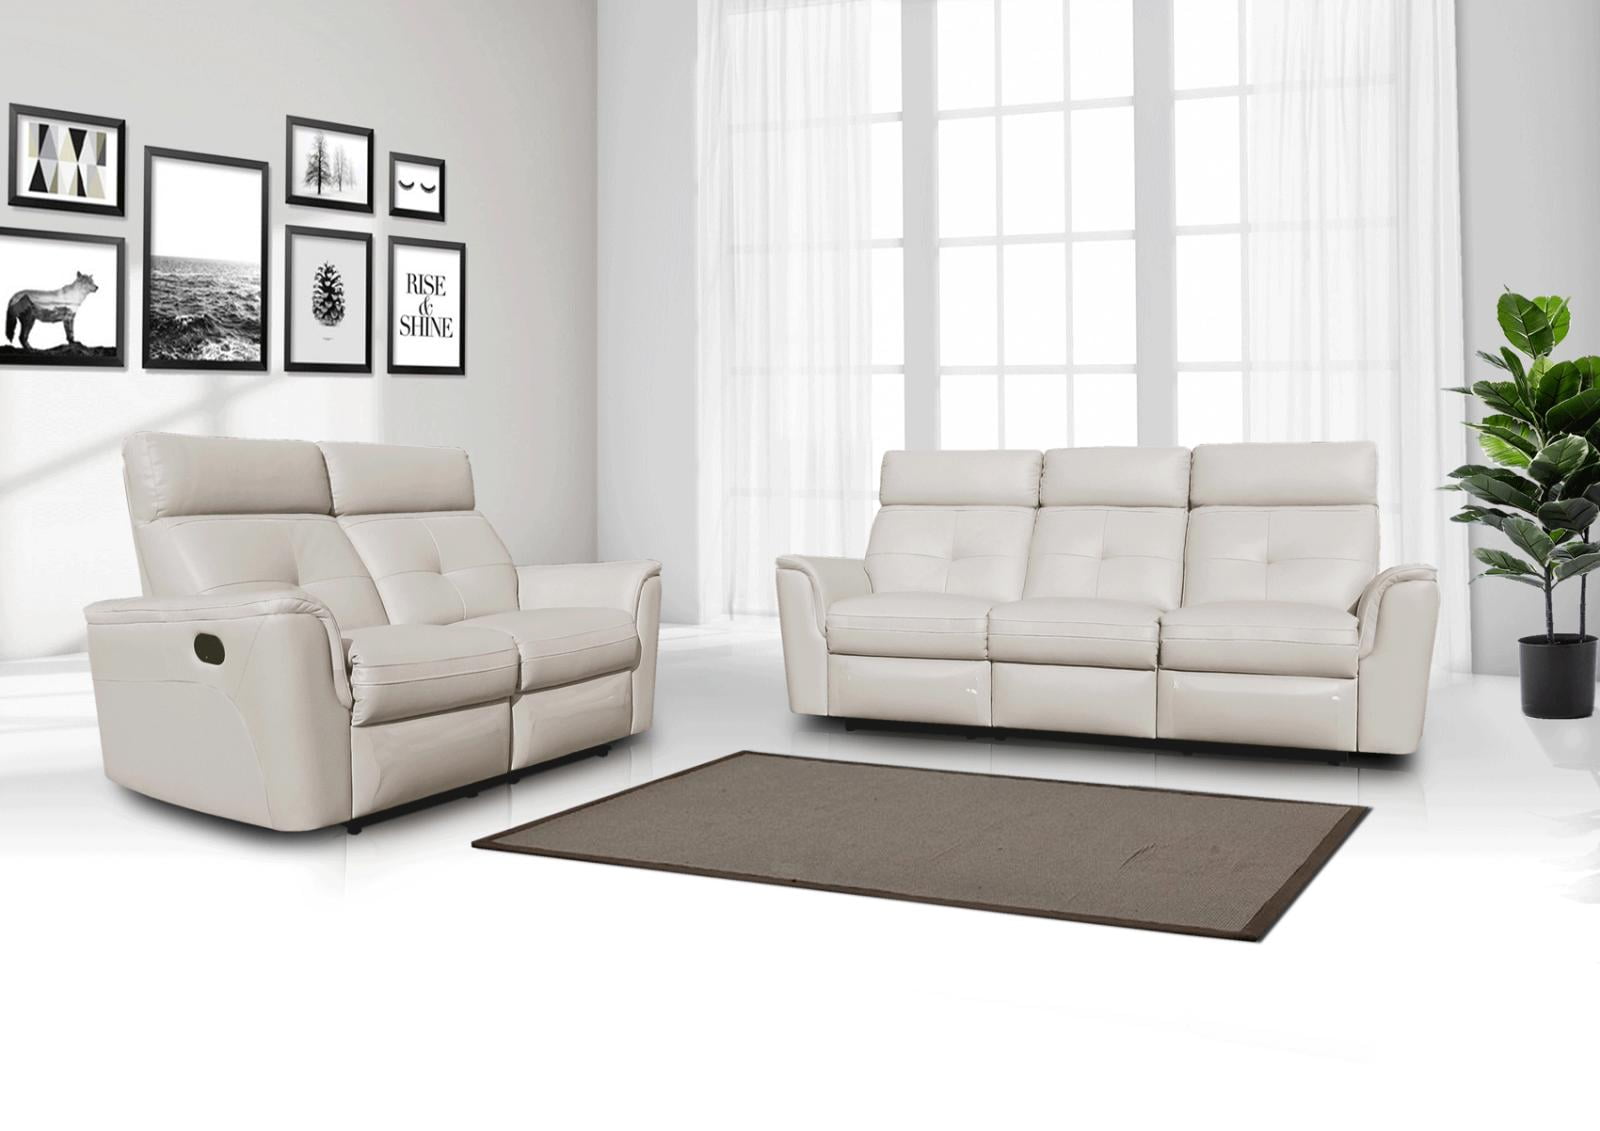 Esf 8501 Contemporary White Italian, Leather Recliner Couch Sets